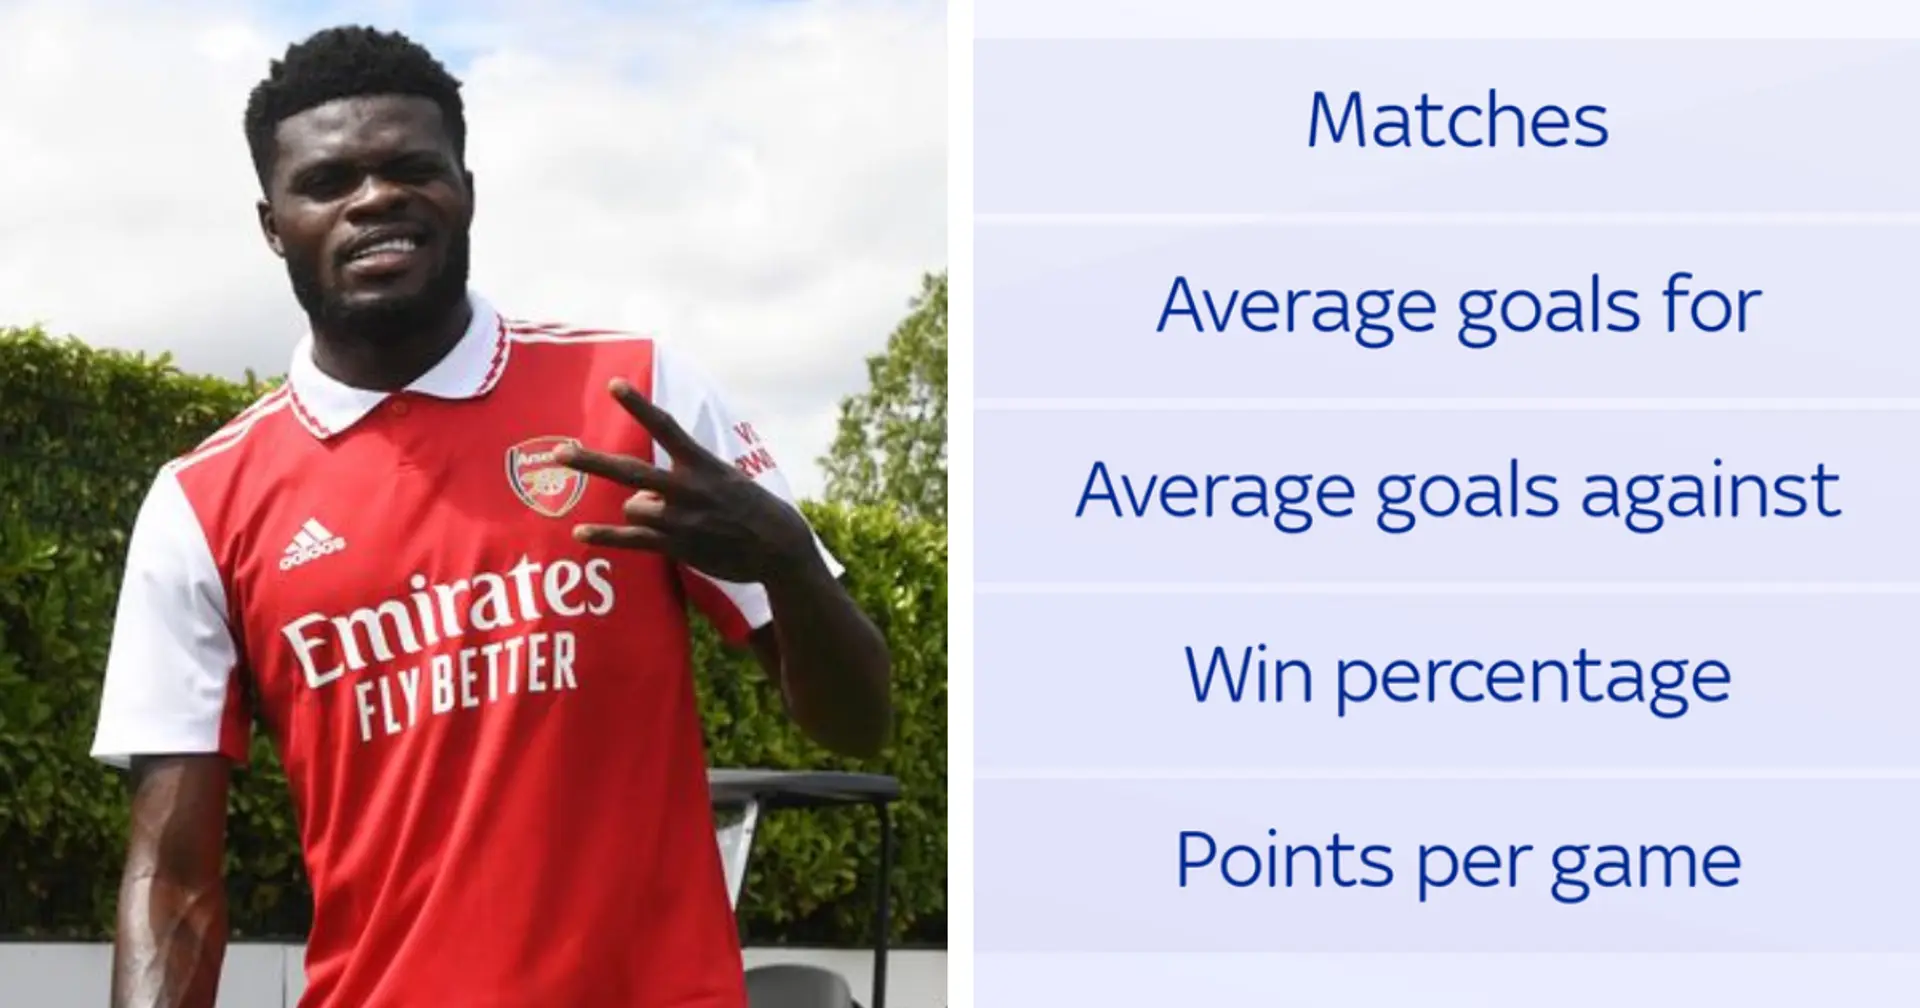 More goals, points & more: stats highlight Thomas Partey's importance to Arsenal